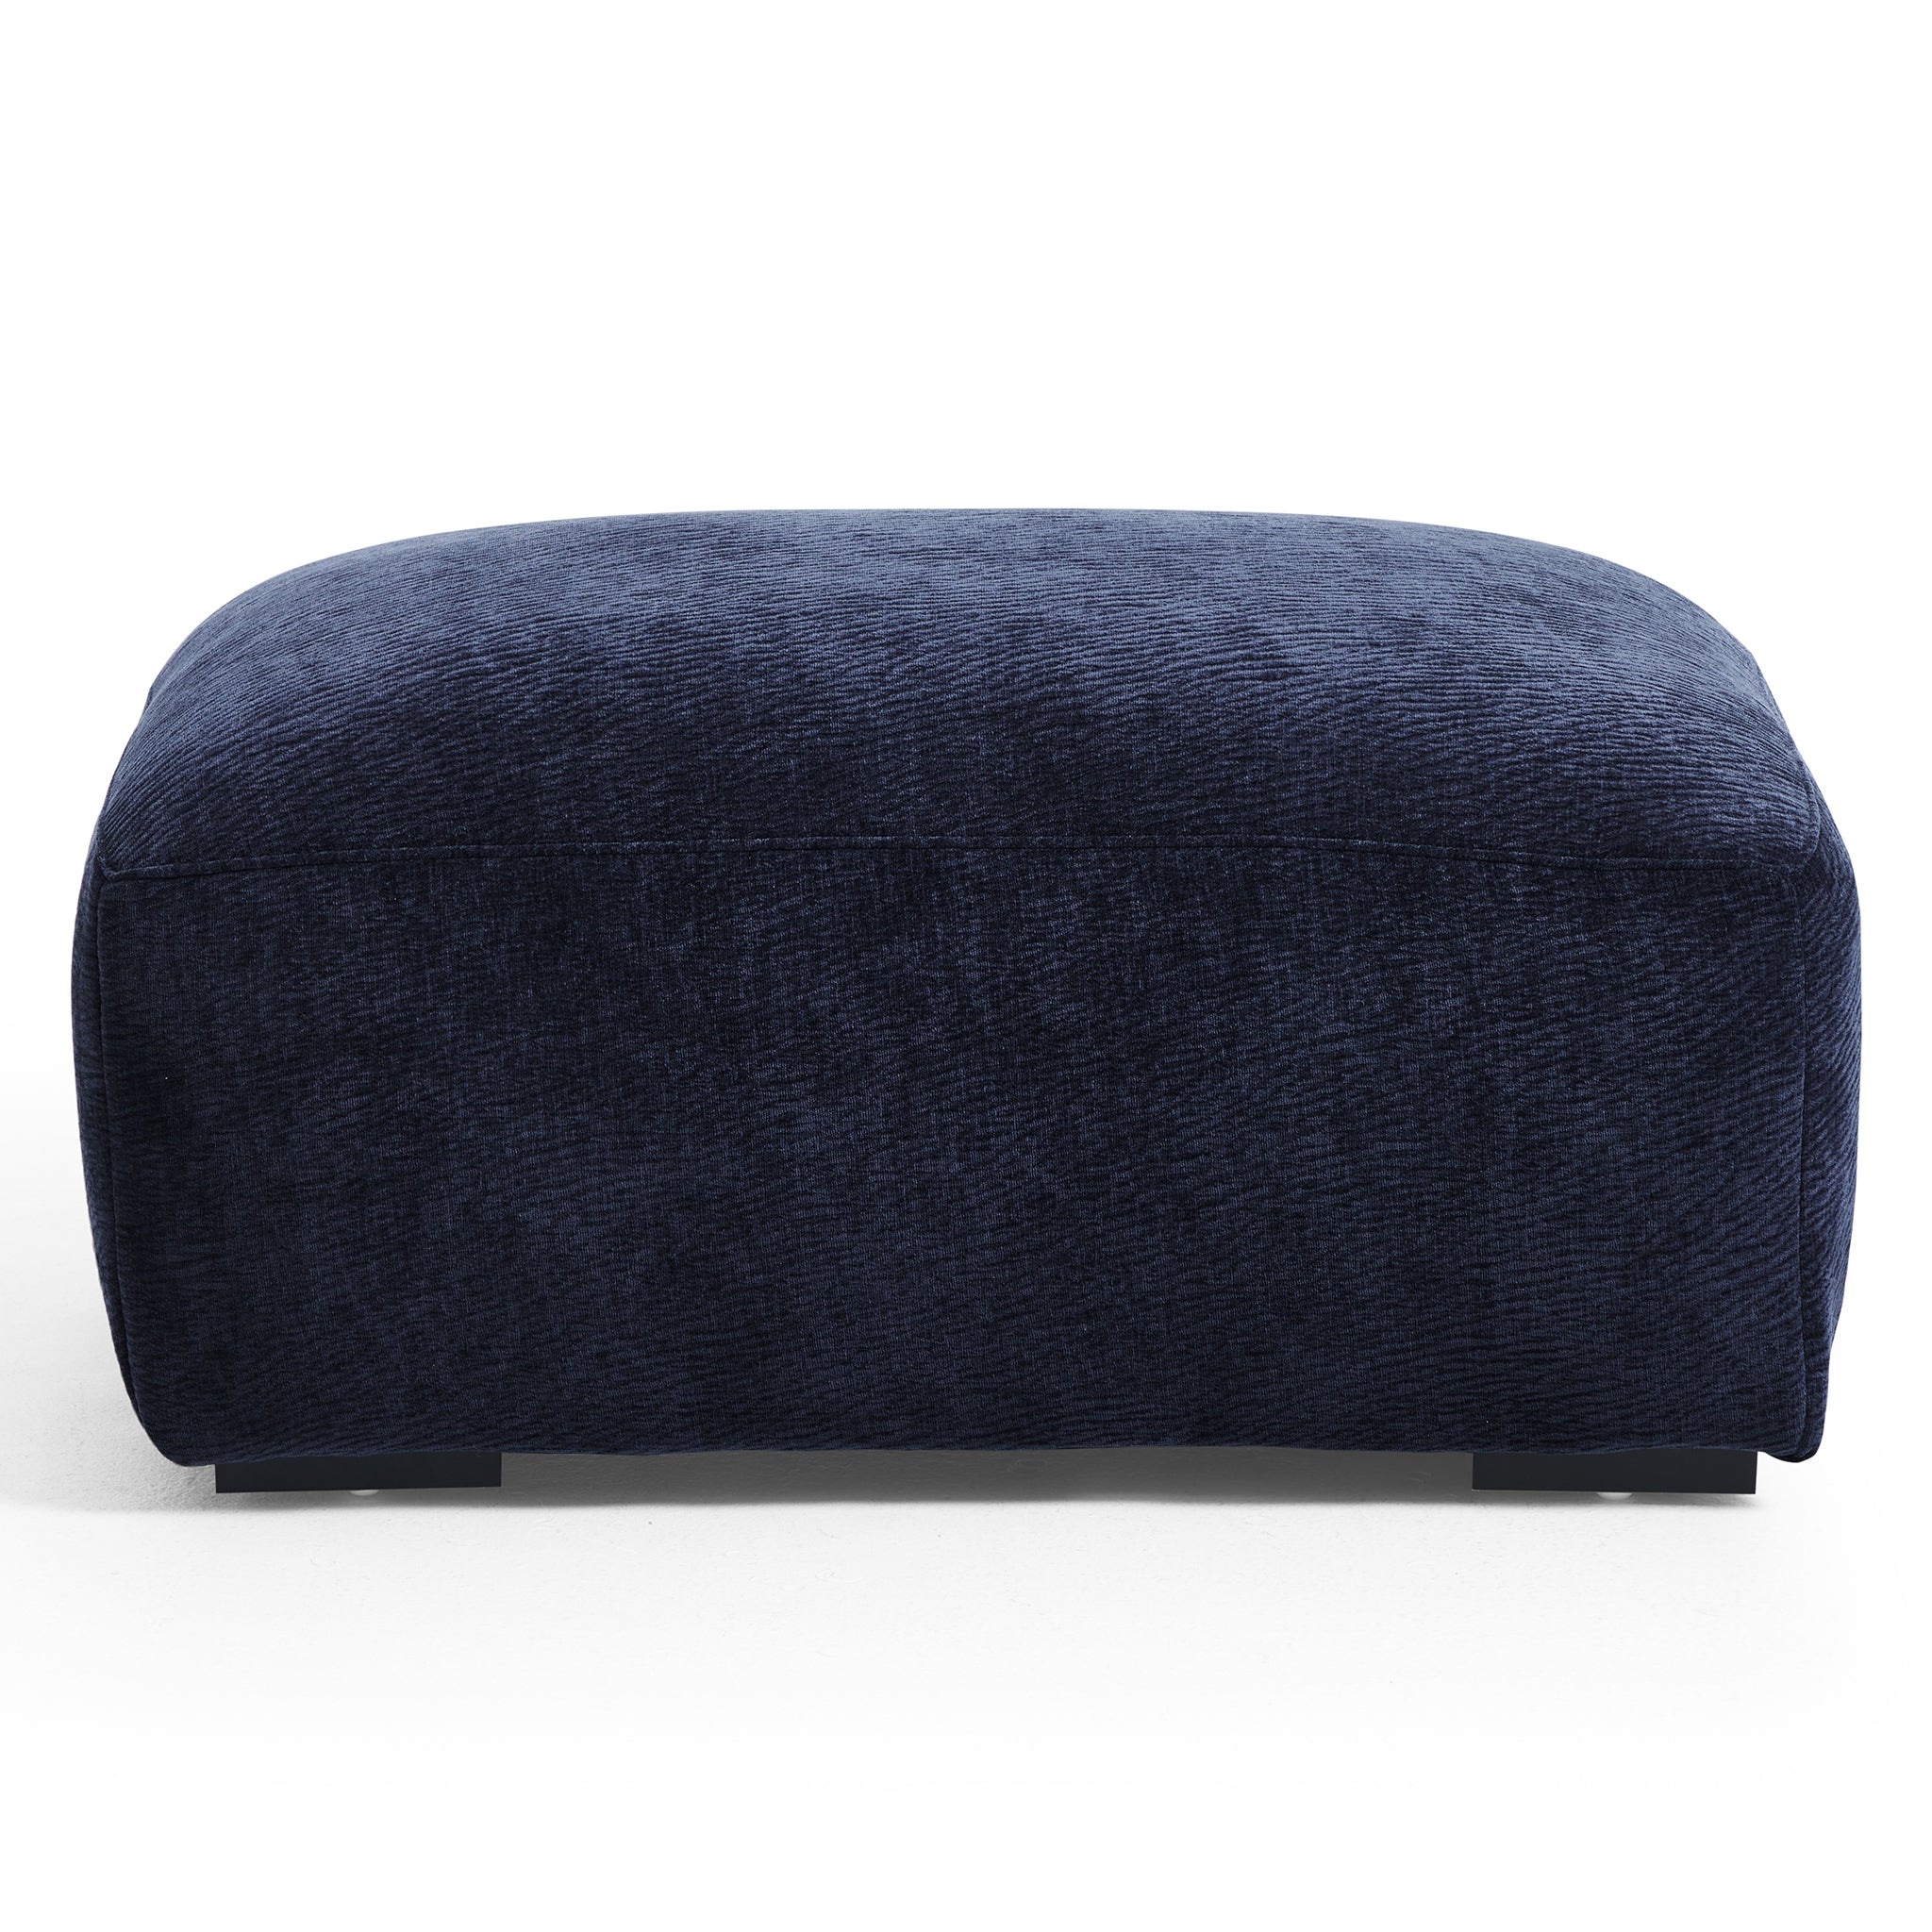 The Empress Navy Blue Sofa and Ottoman